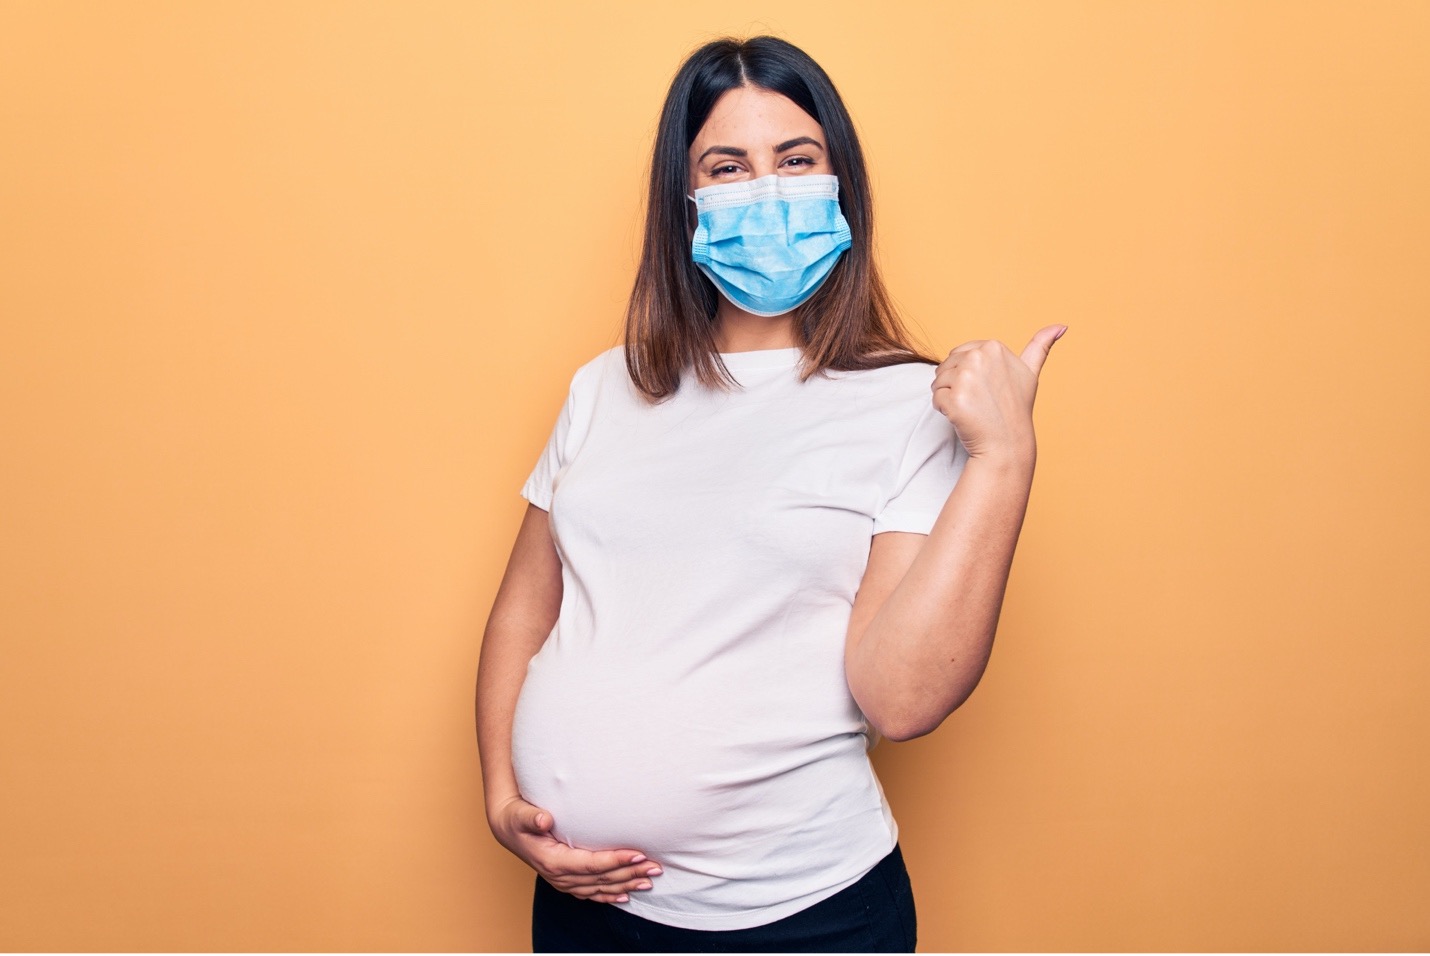 A pregnant individual wearing a medical mask gives a thumbs up